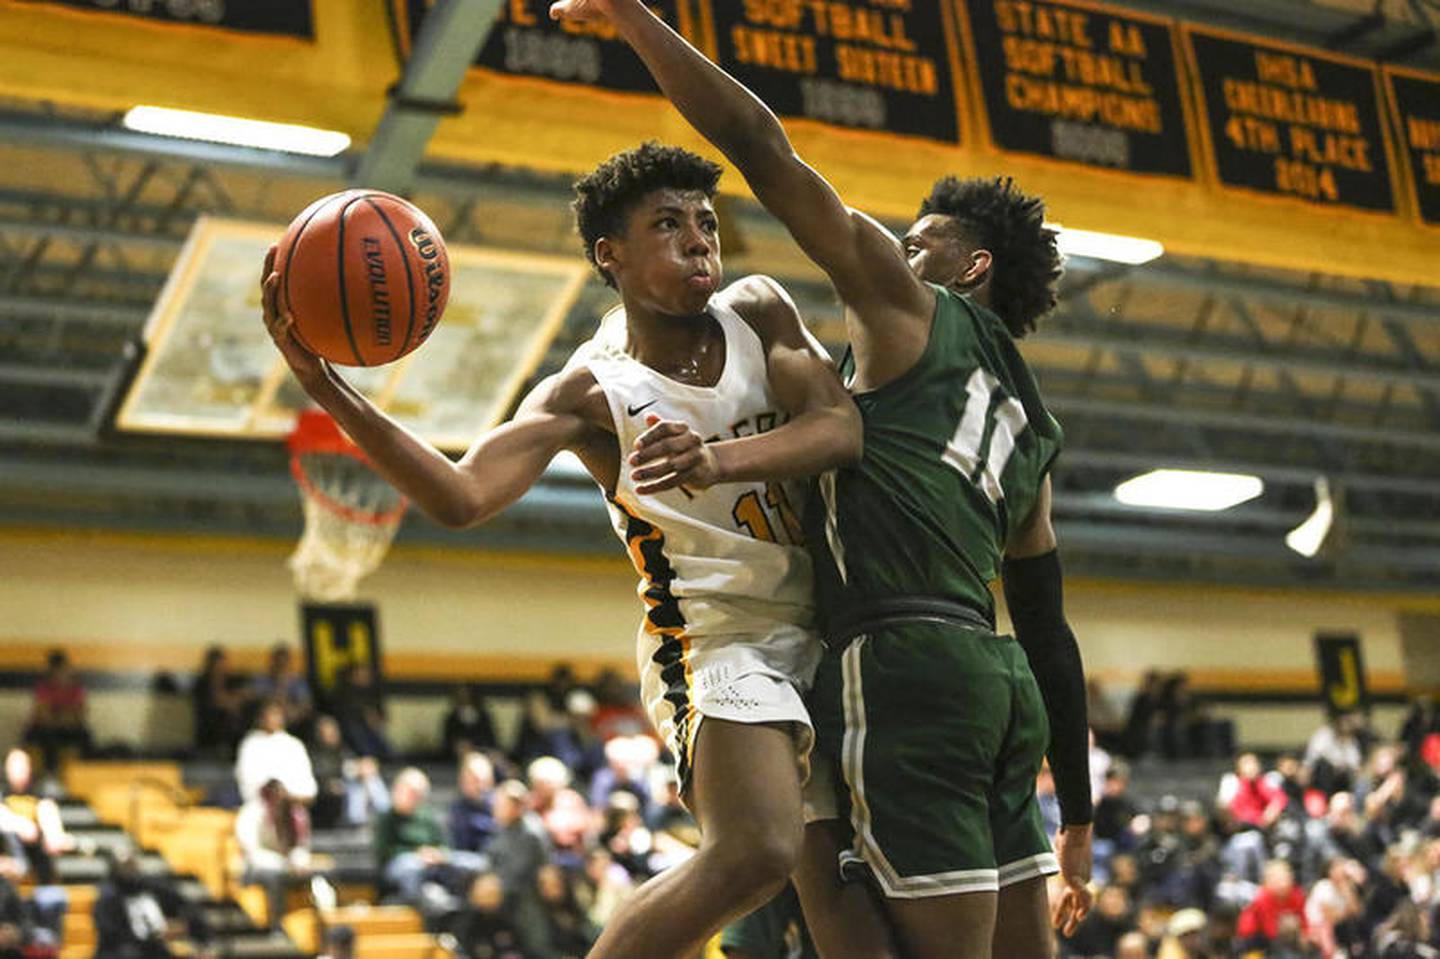 Joliet West's Jeremy Fears Jr. dishes the ball out after driving into the paint on Monday, Feb. 24, 2020, at Joliet West High School.